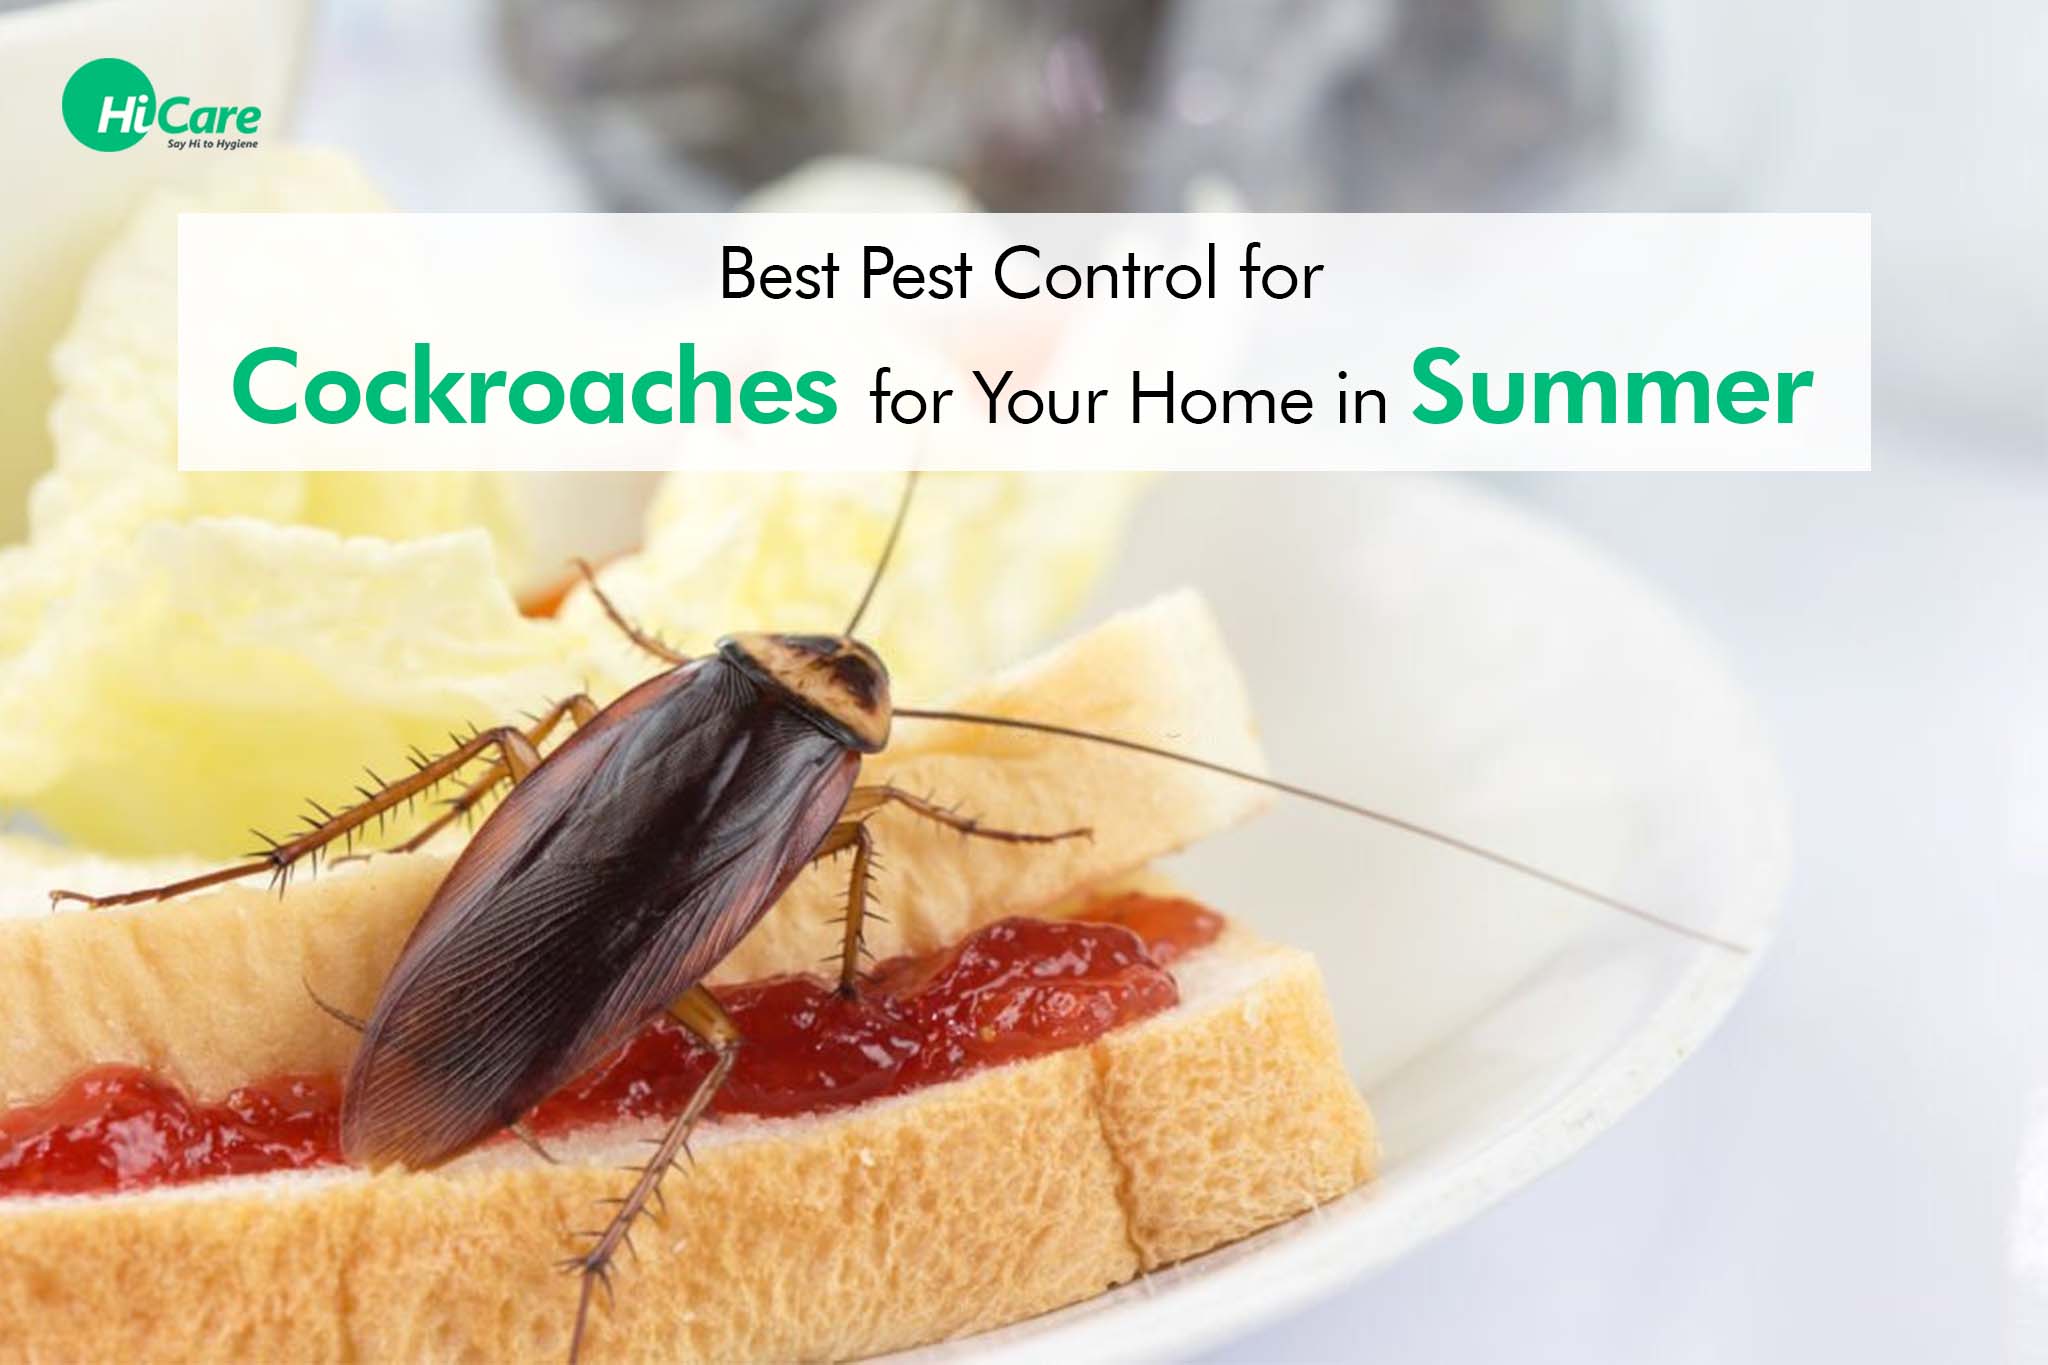 Best Pest Control for Cockroaches for Your Home in Summer! HiCare